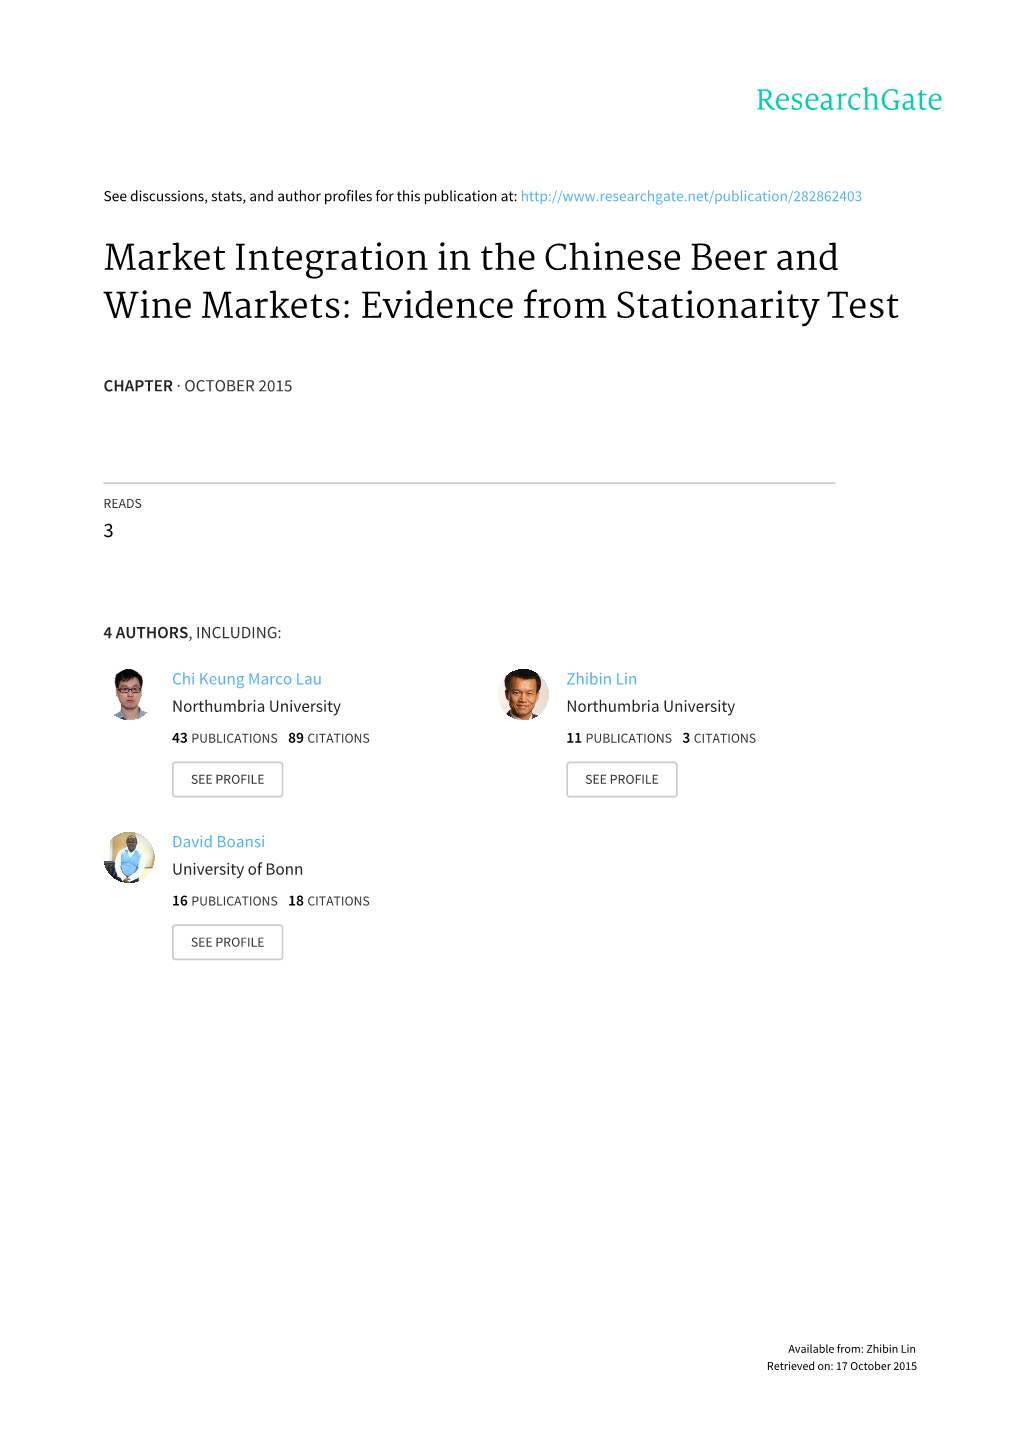 Market Integration in the Chinese Beer and Wine Markets: Evidence from Stationarity Test